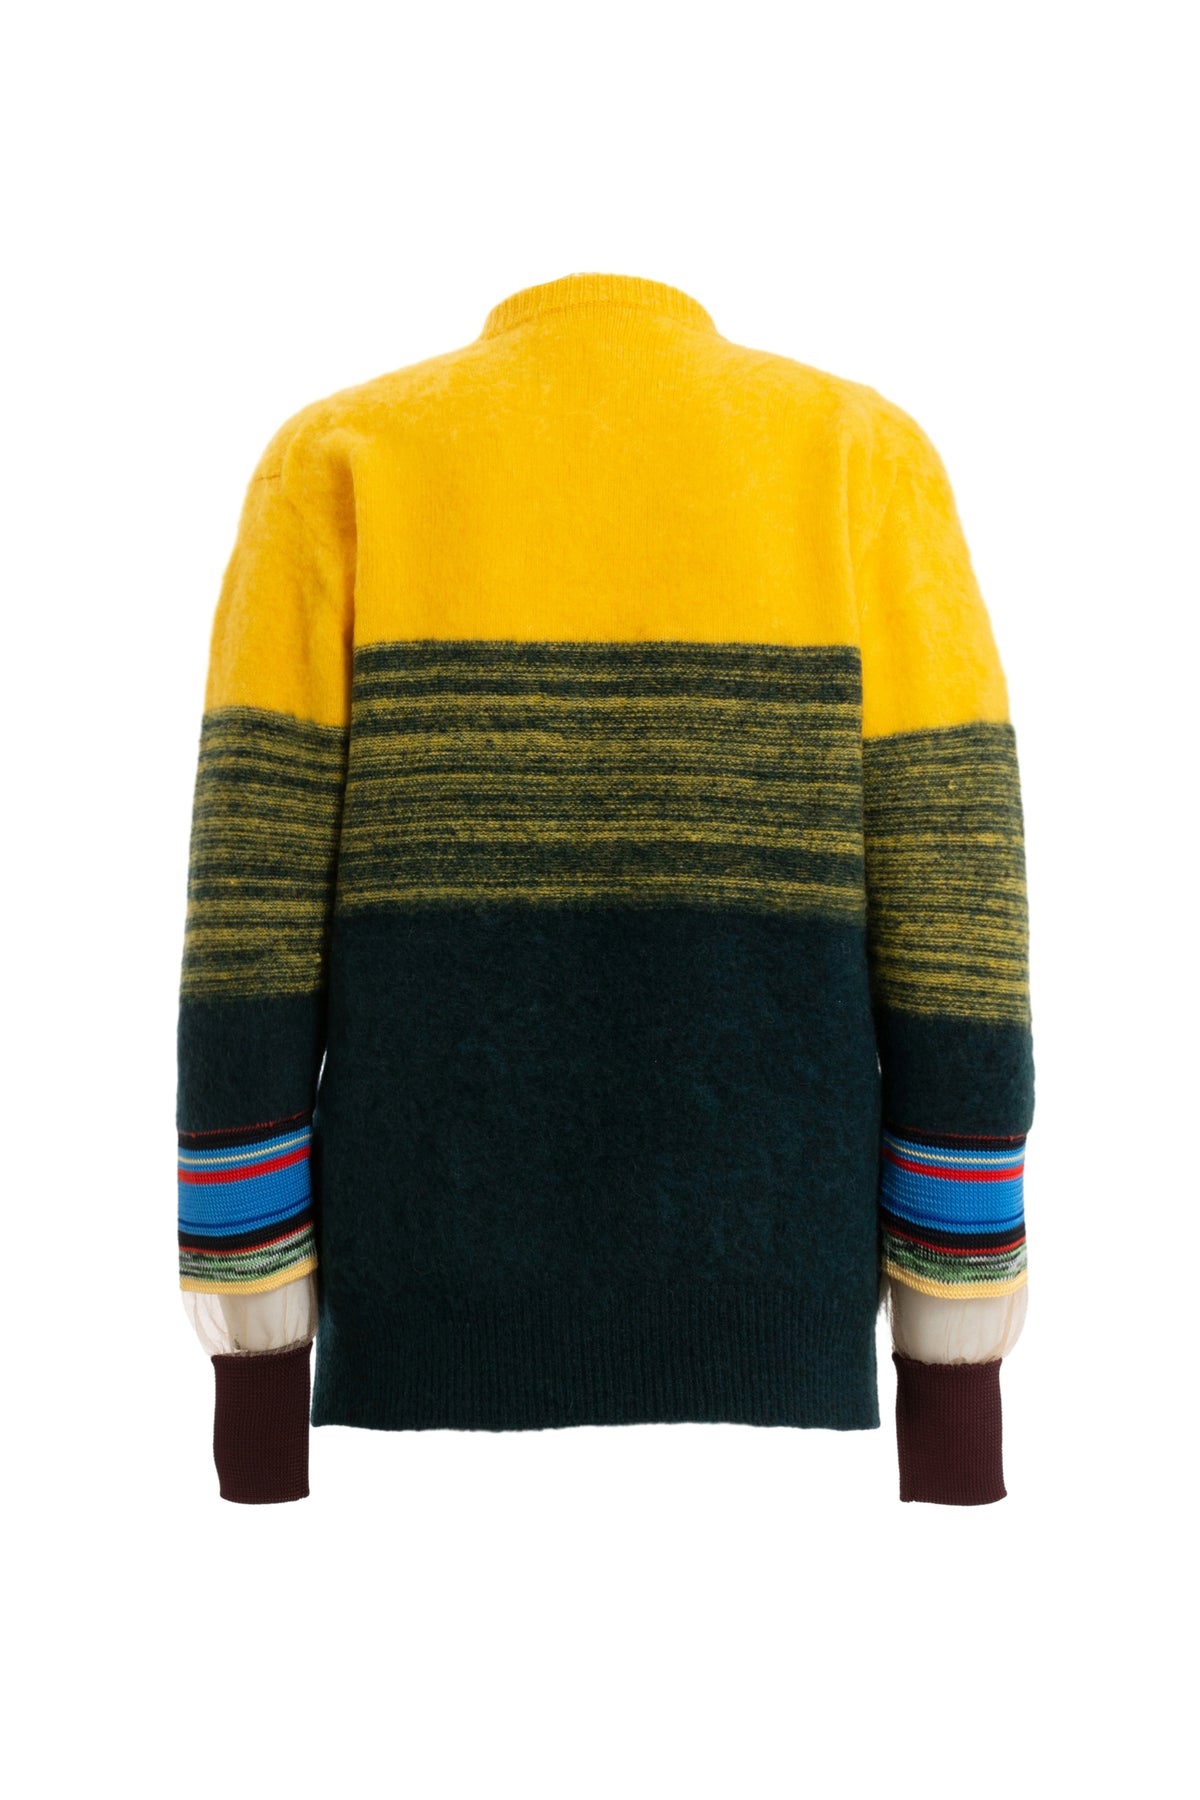 BORDER KNIT PULLOVER / YLW